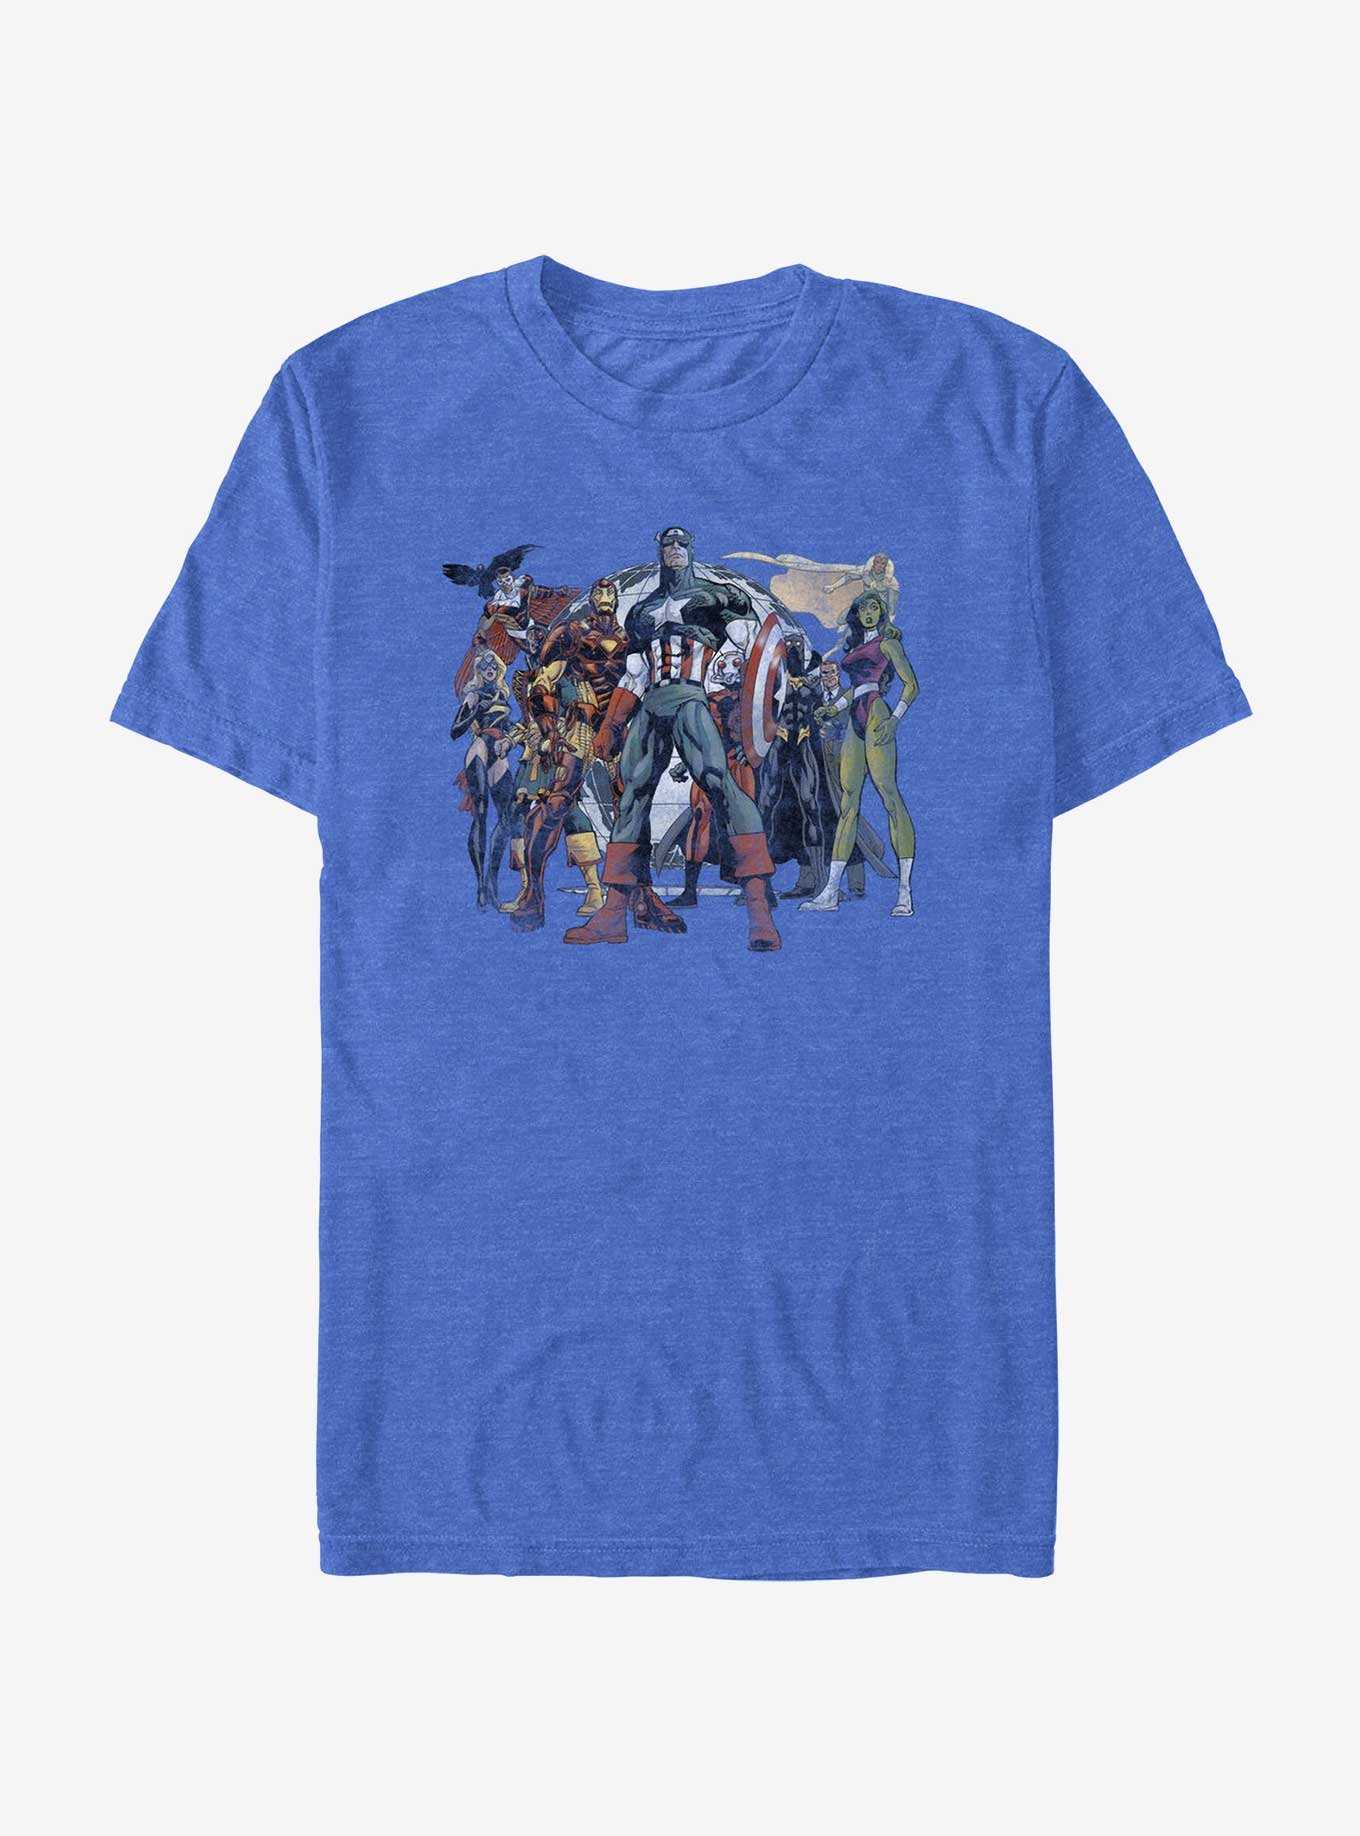 Marvel Avengers The Awesomest T-Shirt, , hi-res